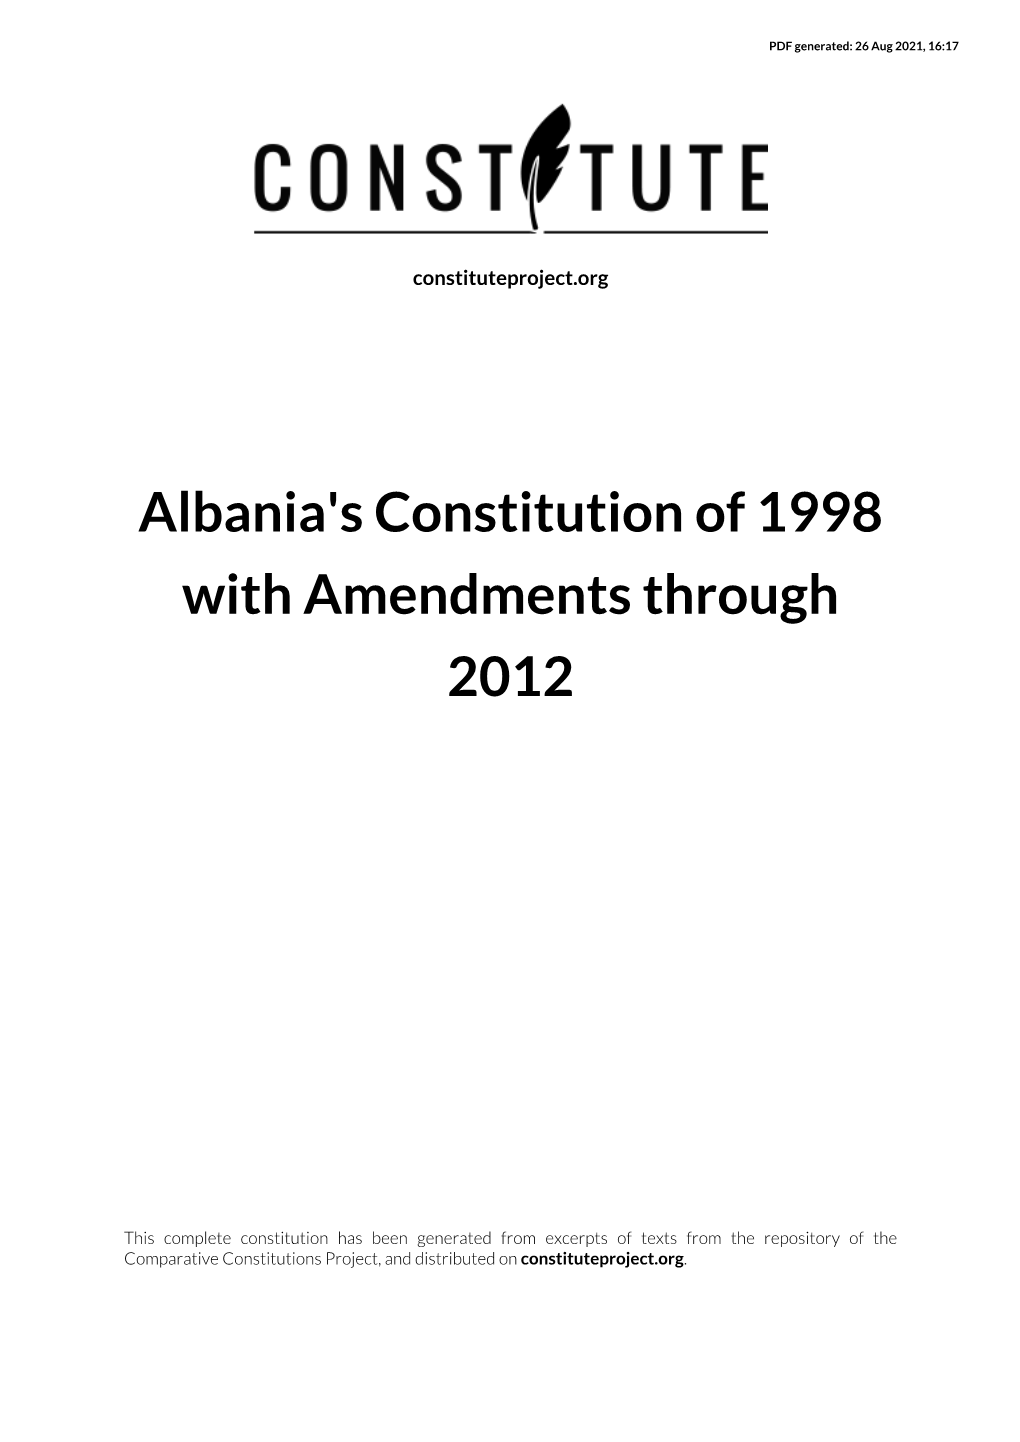 Albania's Constitution of 1998 with Amendments Through 2012